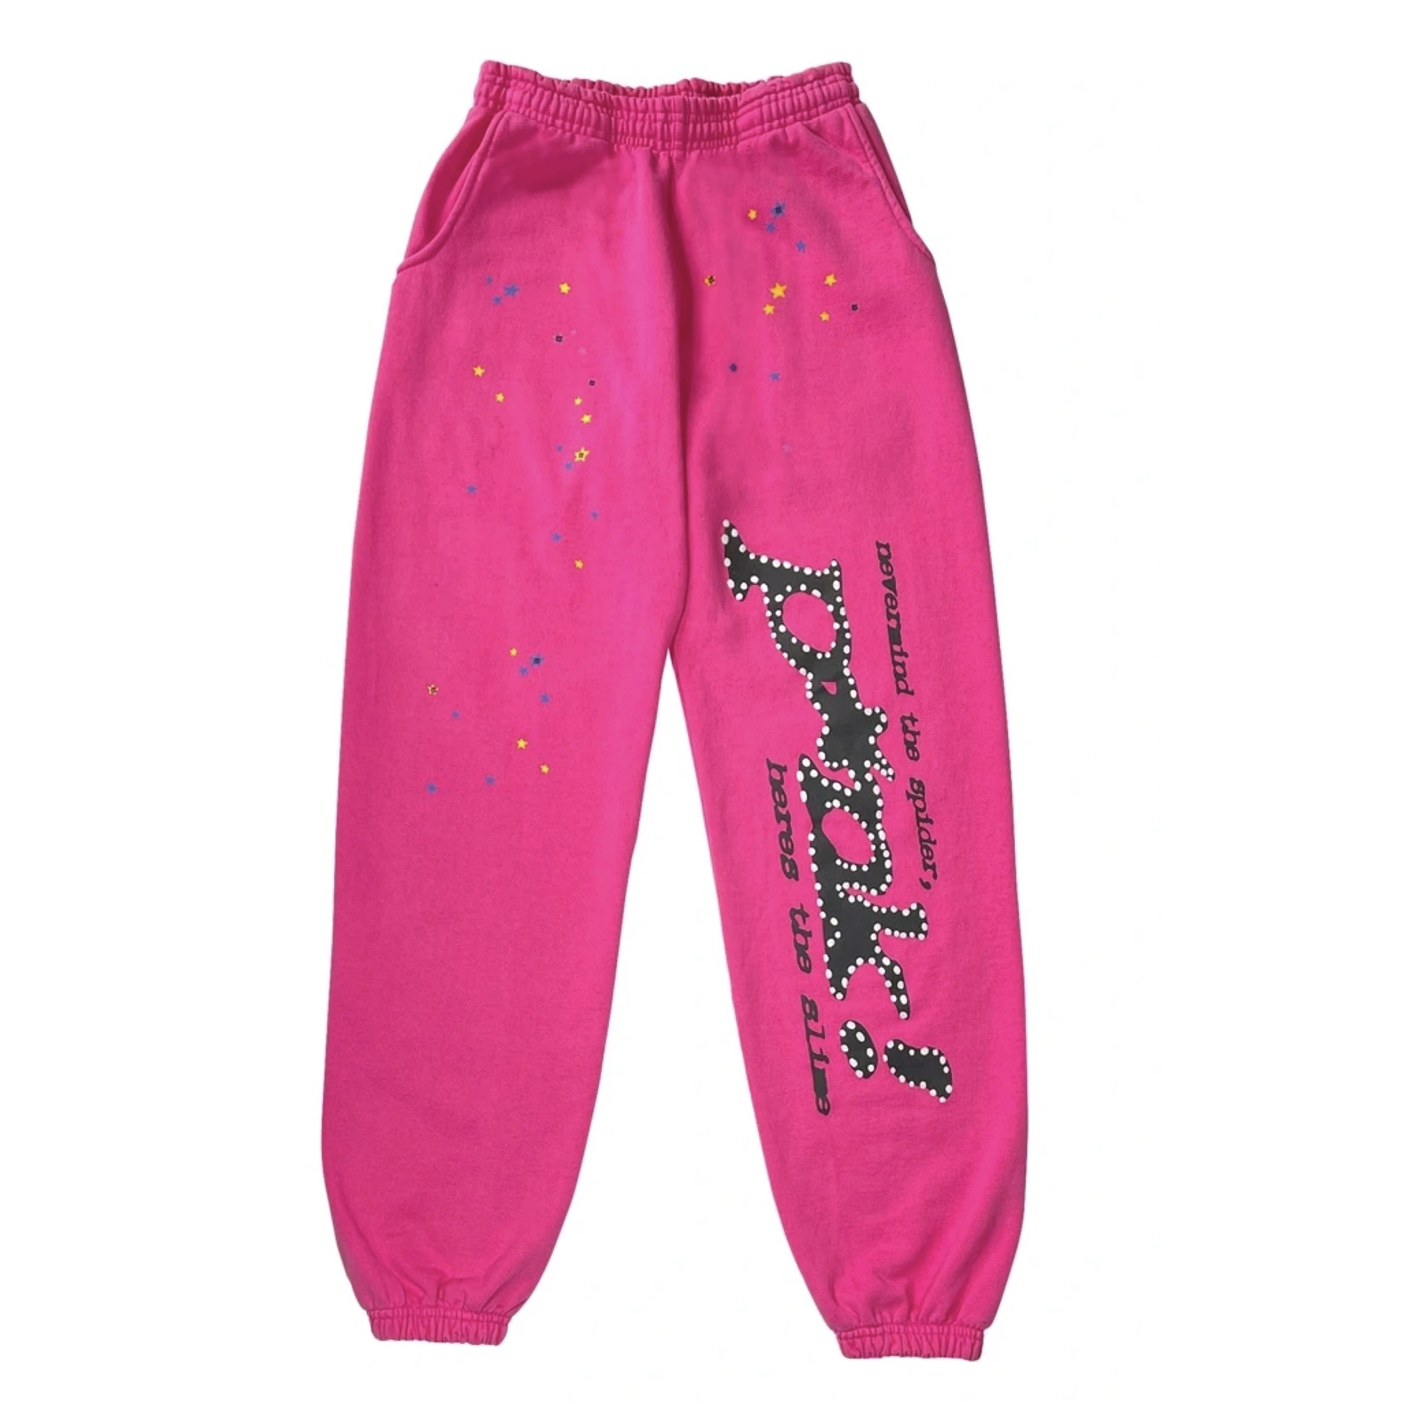 Sp5der P*NK Young Thug Sweatpants Pink from Young Thug